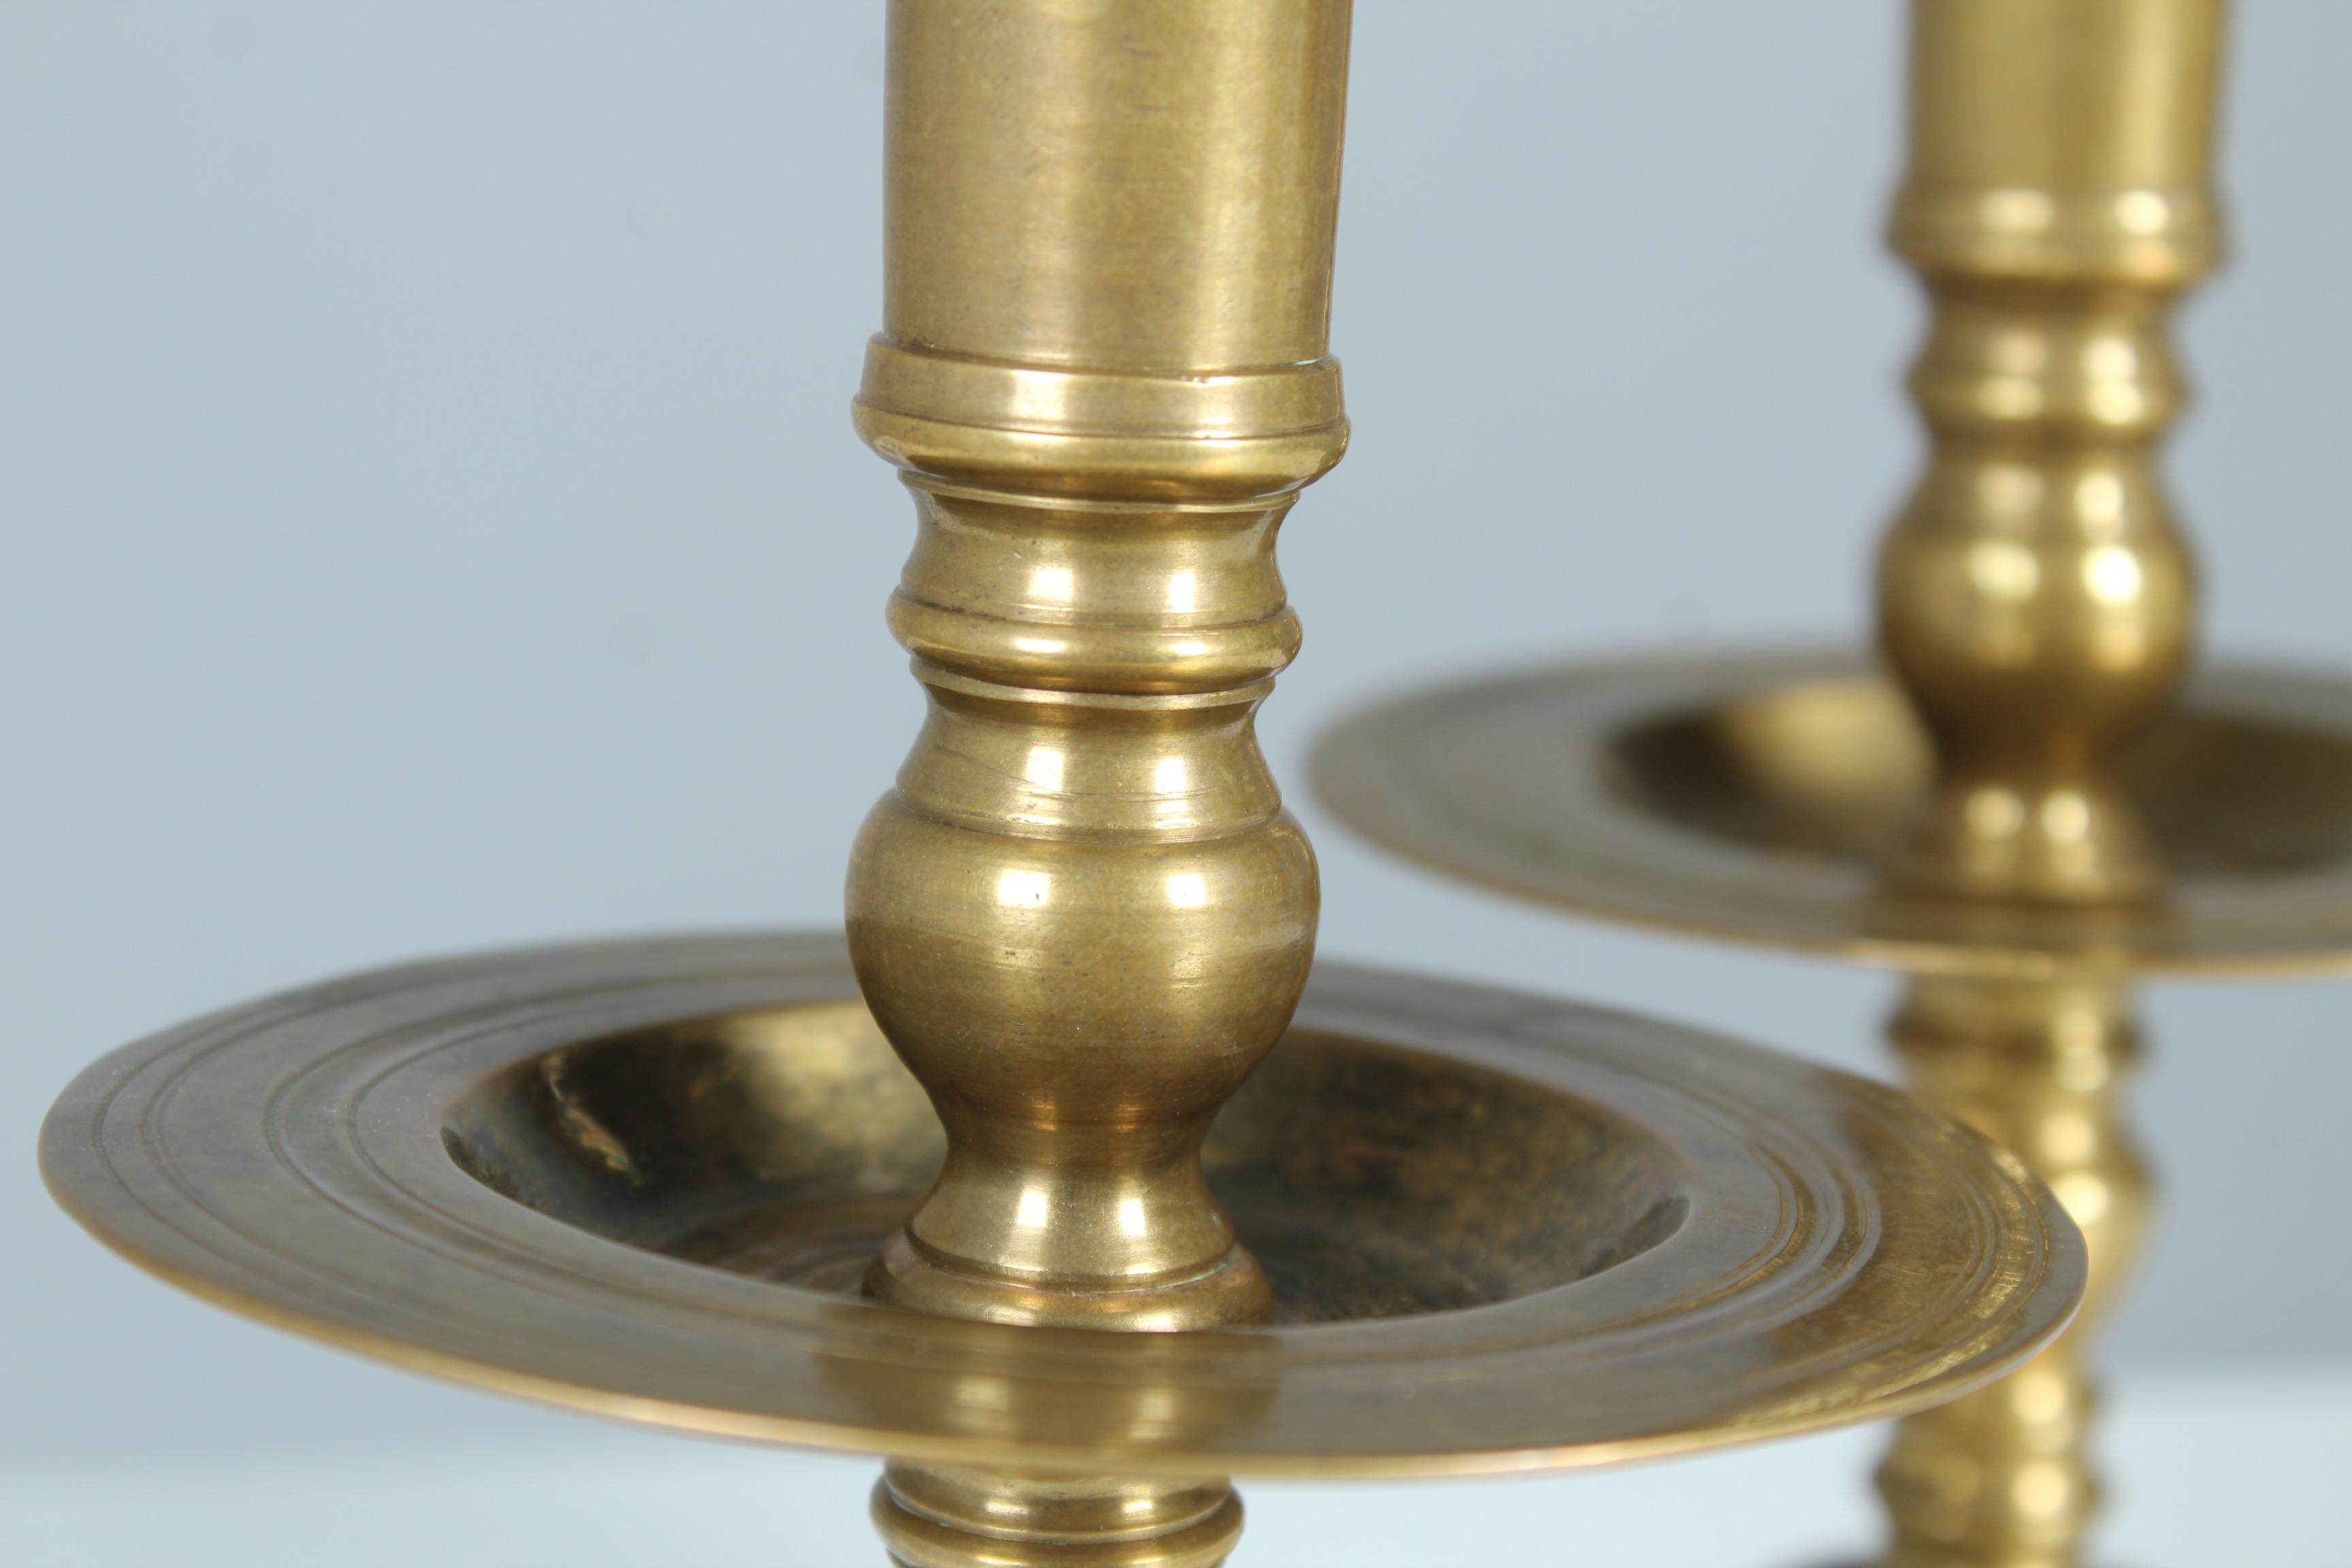 Pair of Antique Candlesticks, Brass, Gilded, Late 19th Century For Sale 2